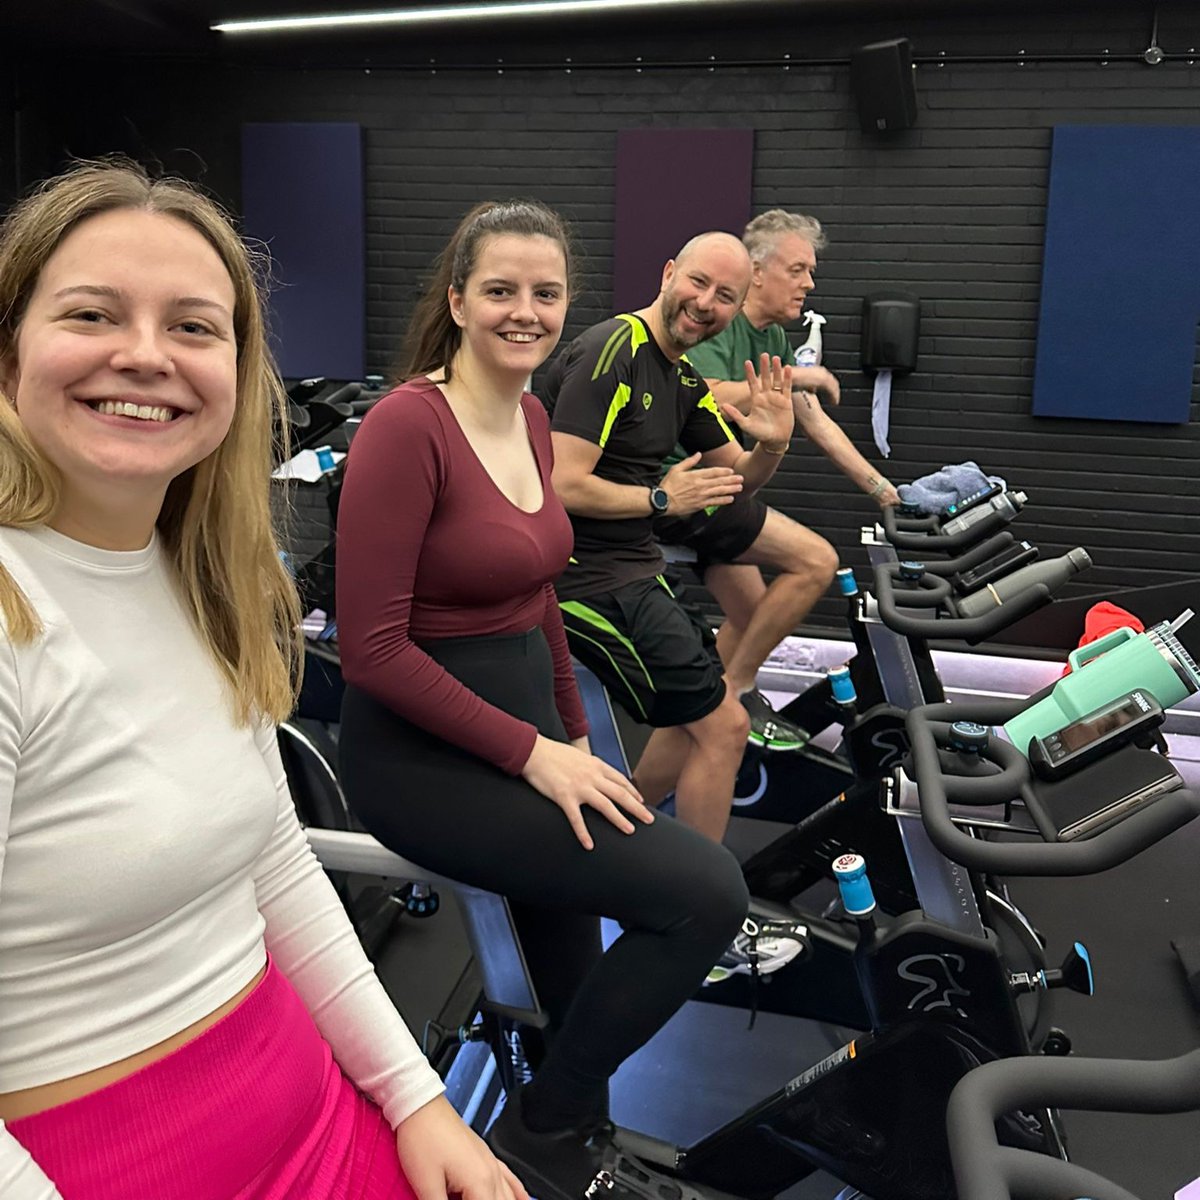 We'll be back at @YMCAPlymouth on 17 April for our next #NetSpinning session - and we want YOU to join us 💪🏼 Experience one of the region's most advanced indoor cycle studios, meet some great people AND chat all things business - register here ⬇️ bit.ly/3xkP8pM